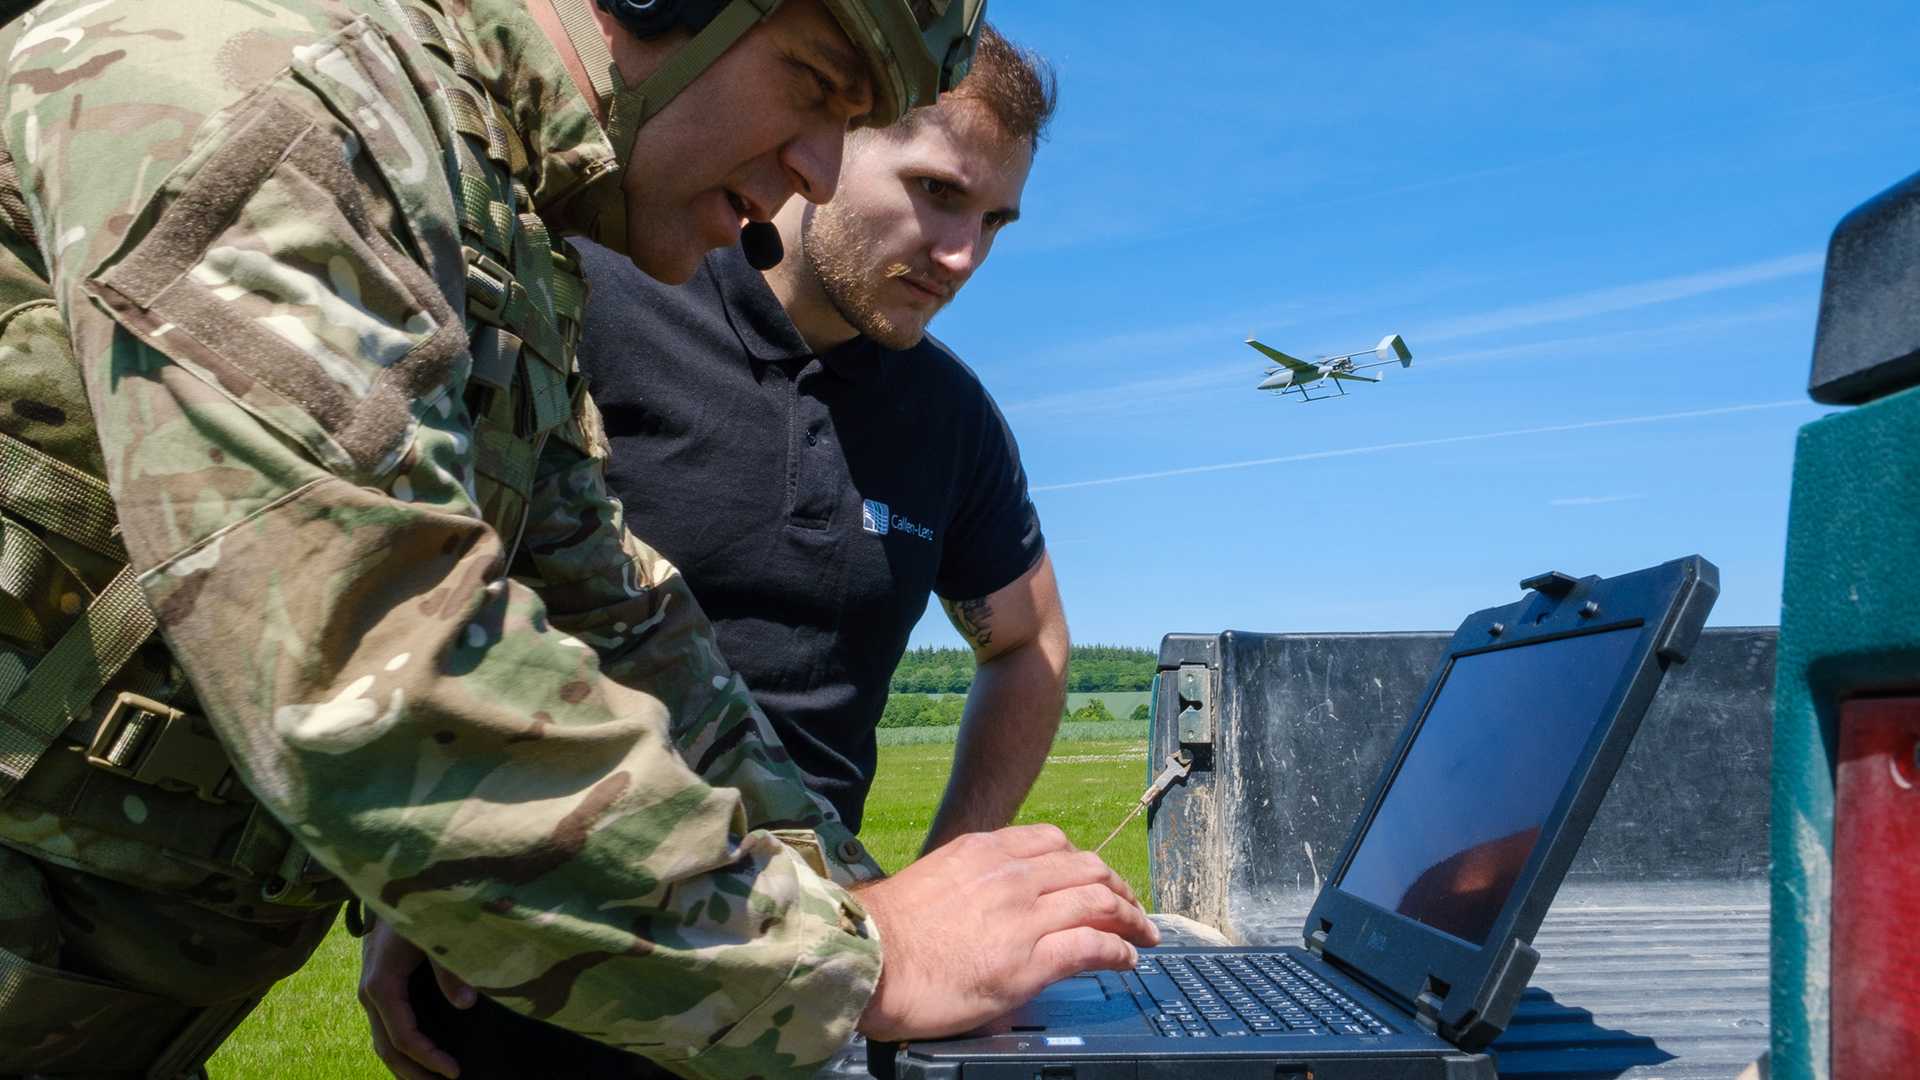 Military personnel using a laptop and a drone in the background